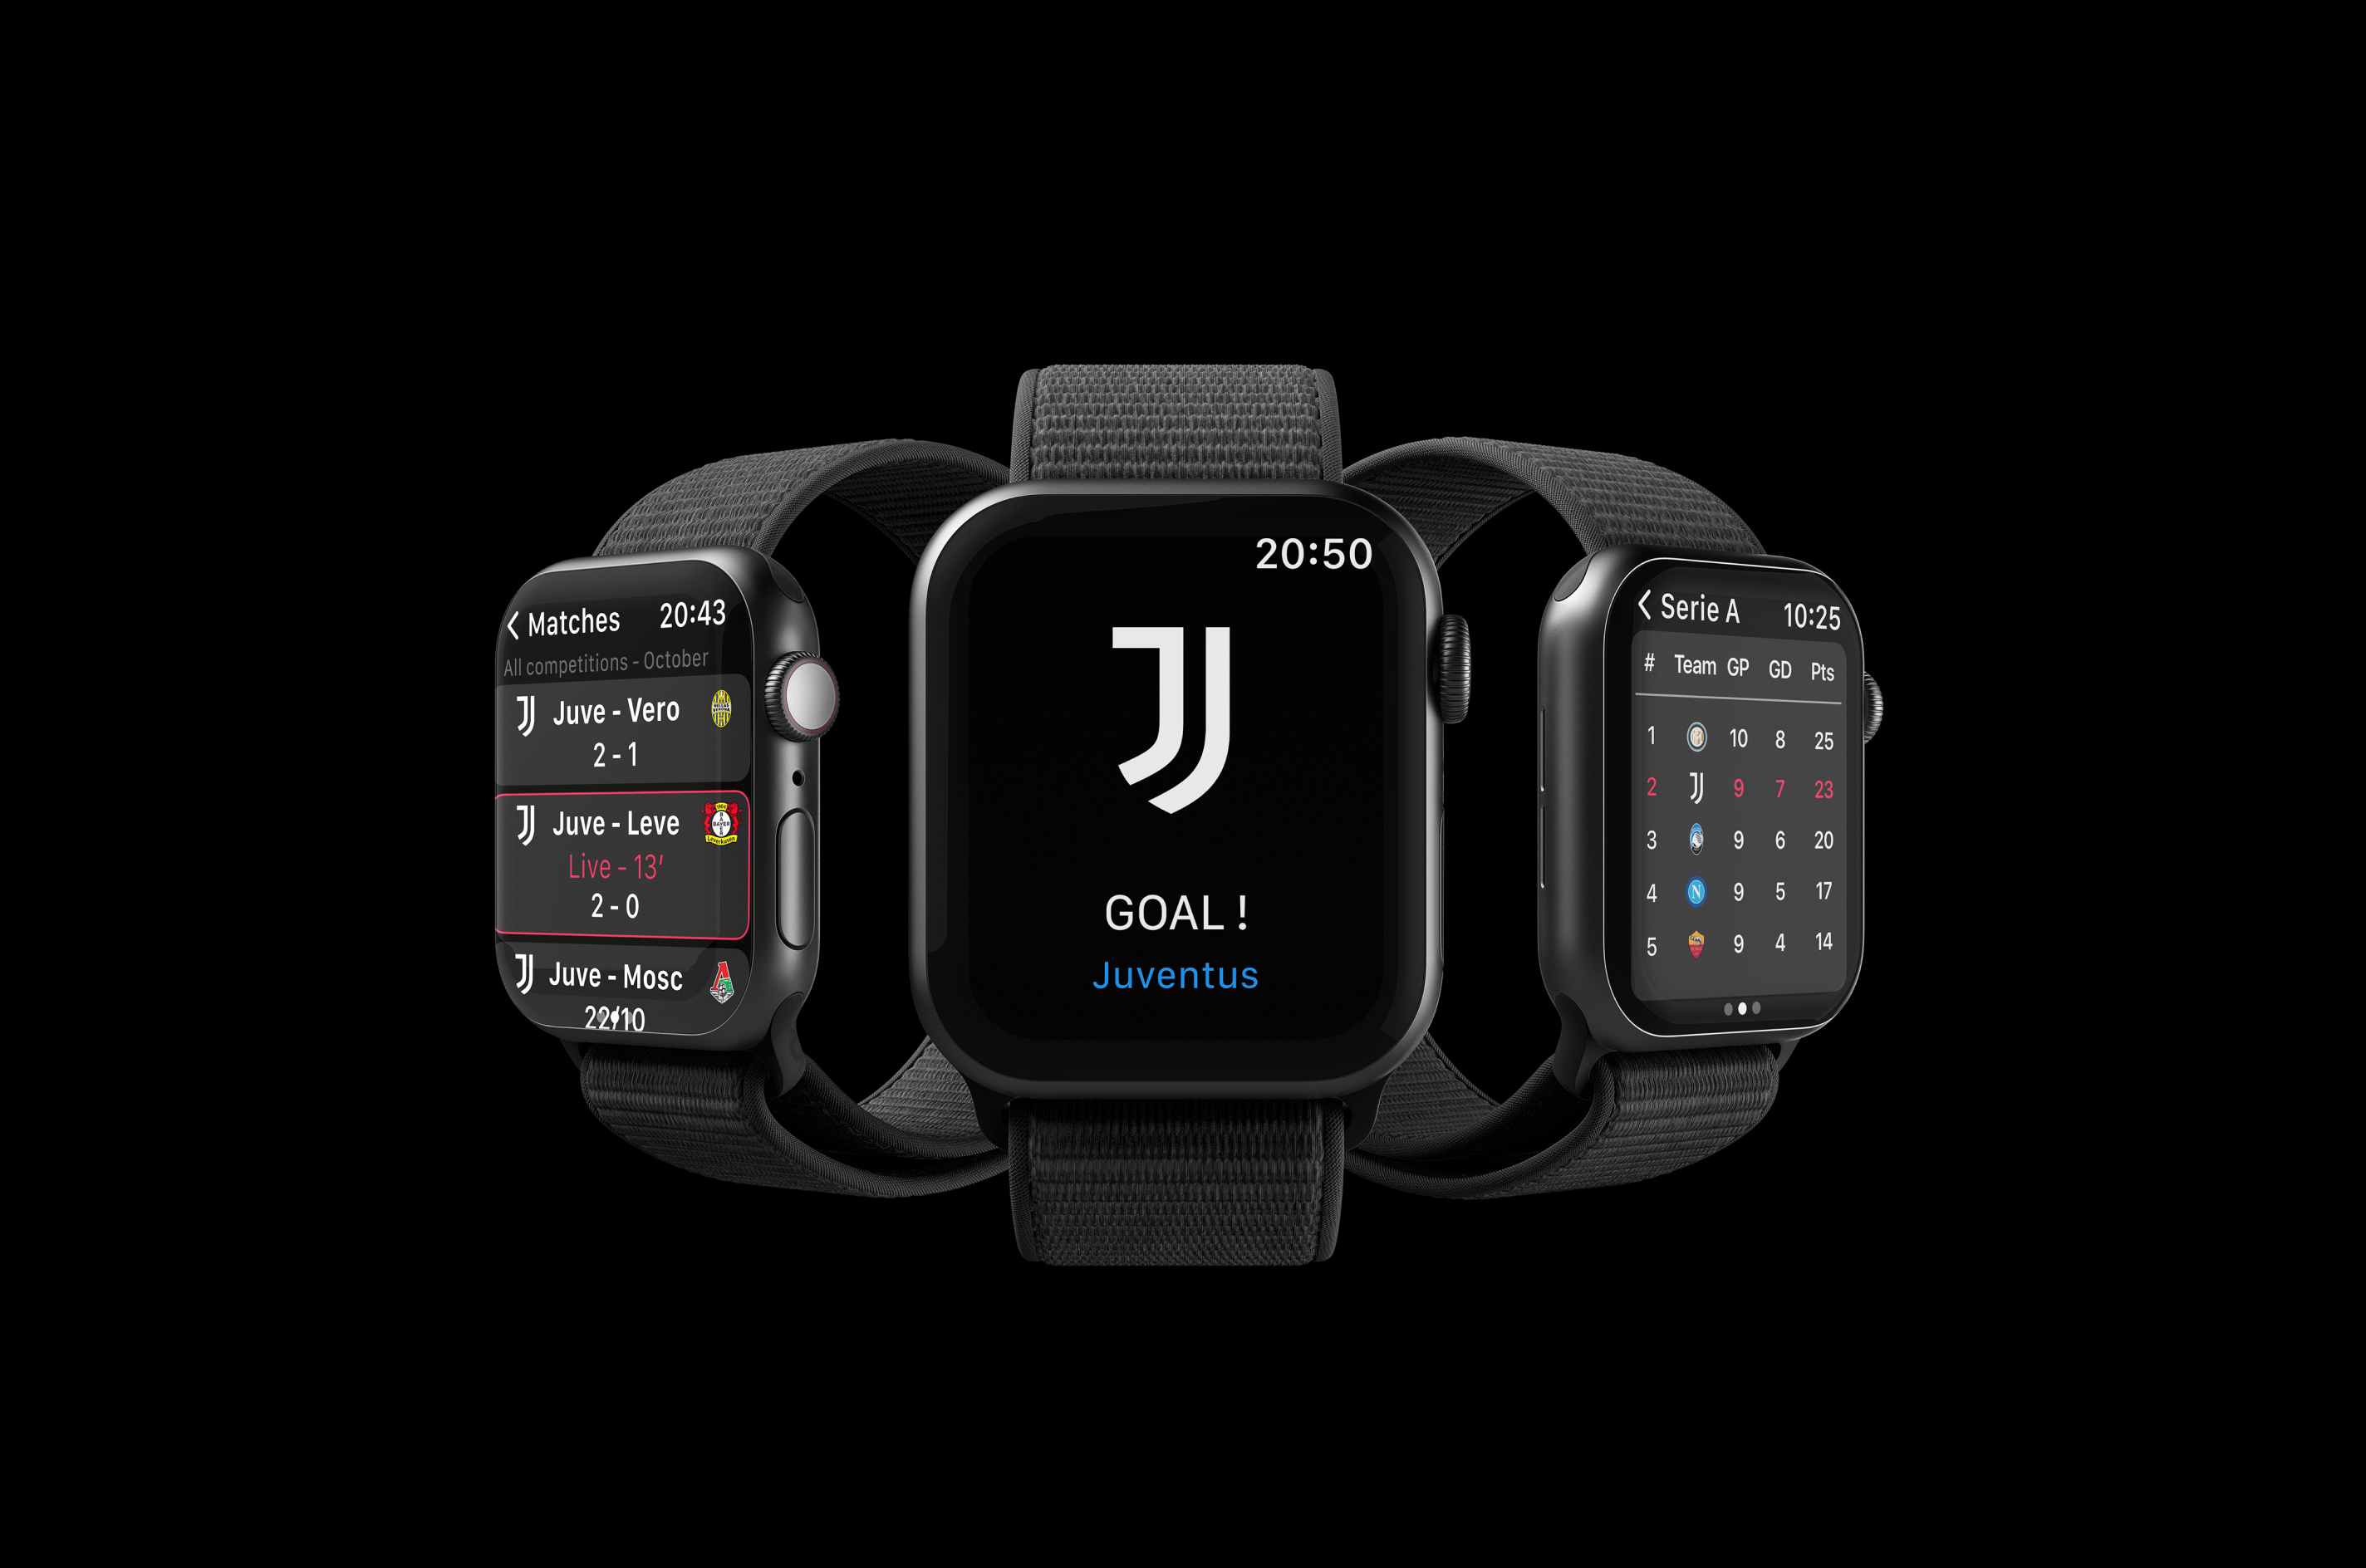 the mobile interface adapts to the smartwatch view, in this case showing in three different screens: (1)  all the Juventus matches scheduled in October, (2) The notification of a goal and who made it, (3) The team leaderboard for Major league